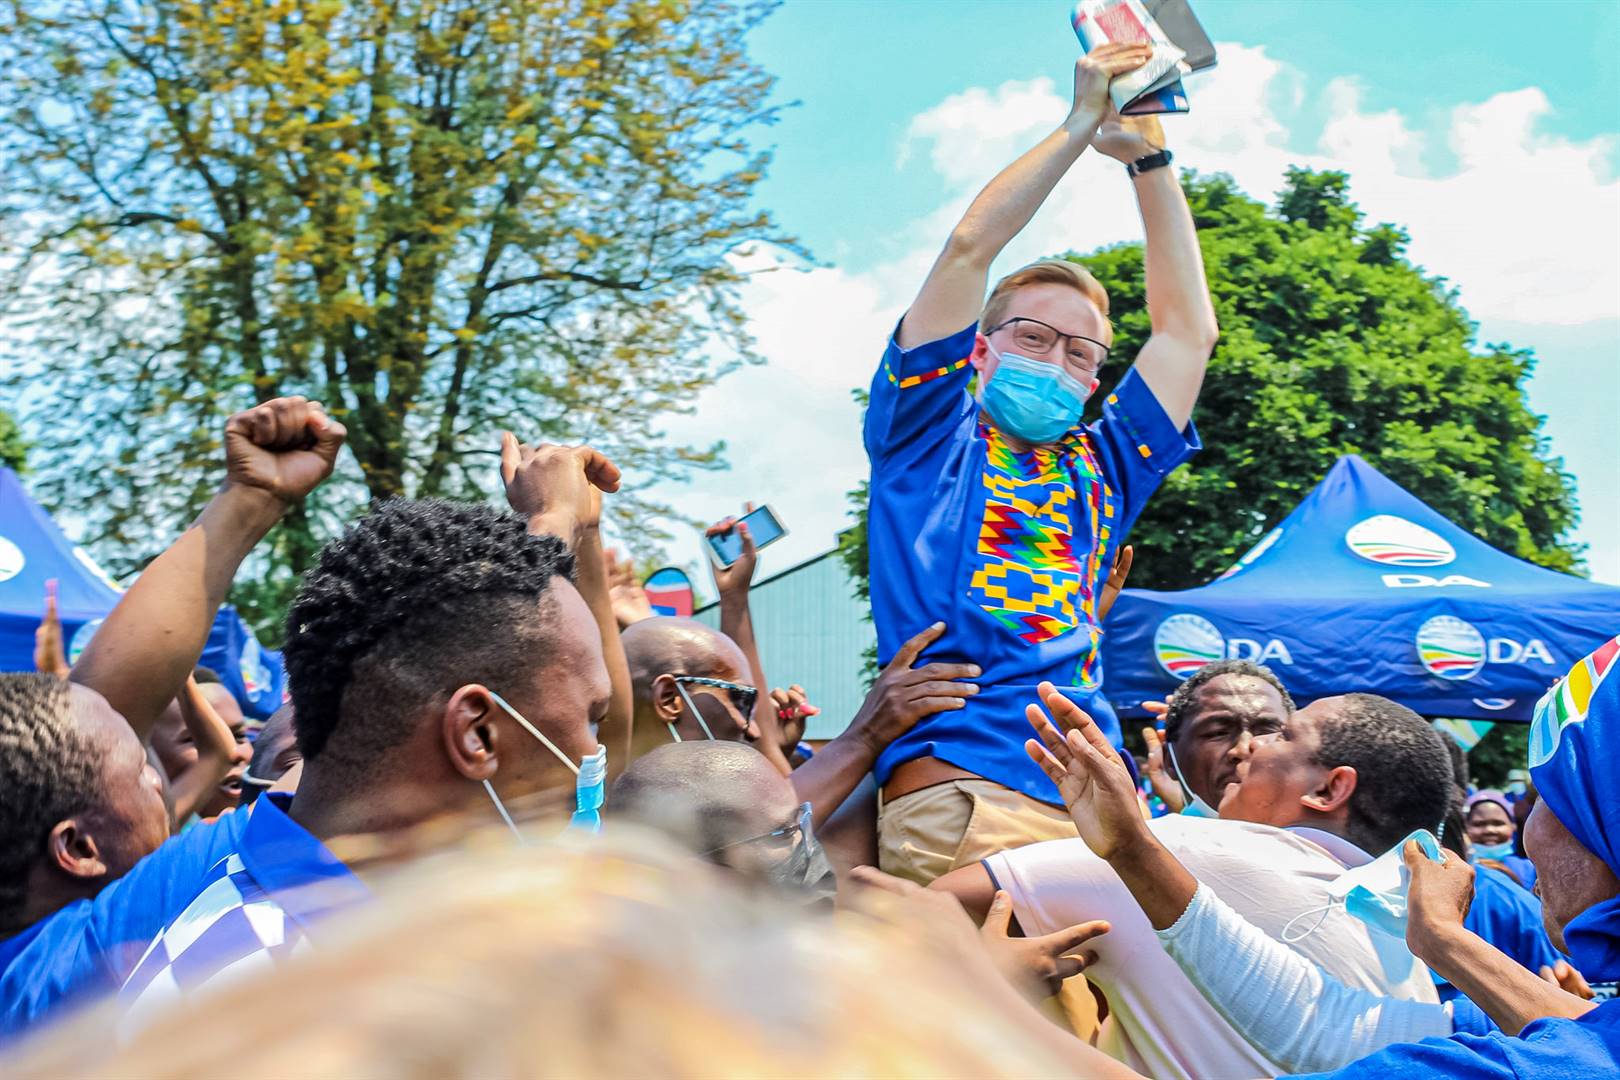 DA Mayoral Candidate Christopher Pappas celebrates with DA supporters at Howick Falls after winning 2021 municipal elections.